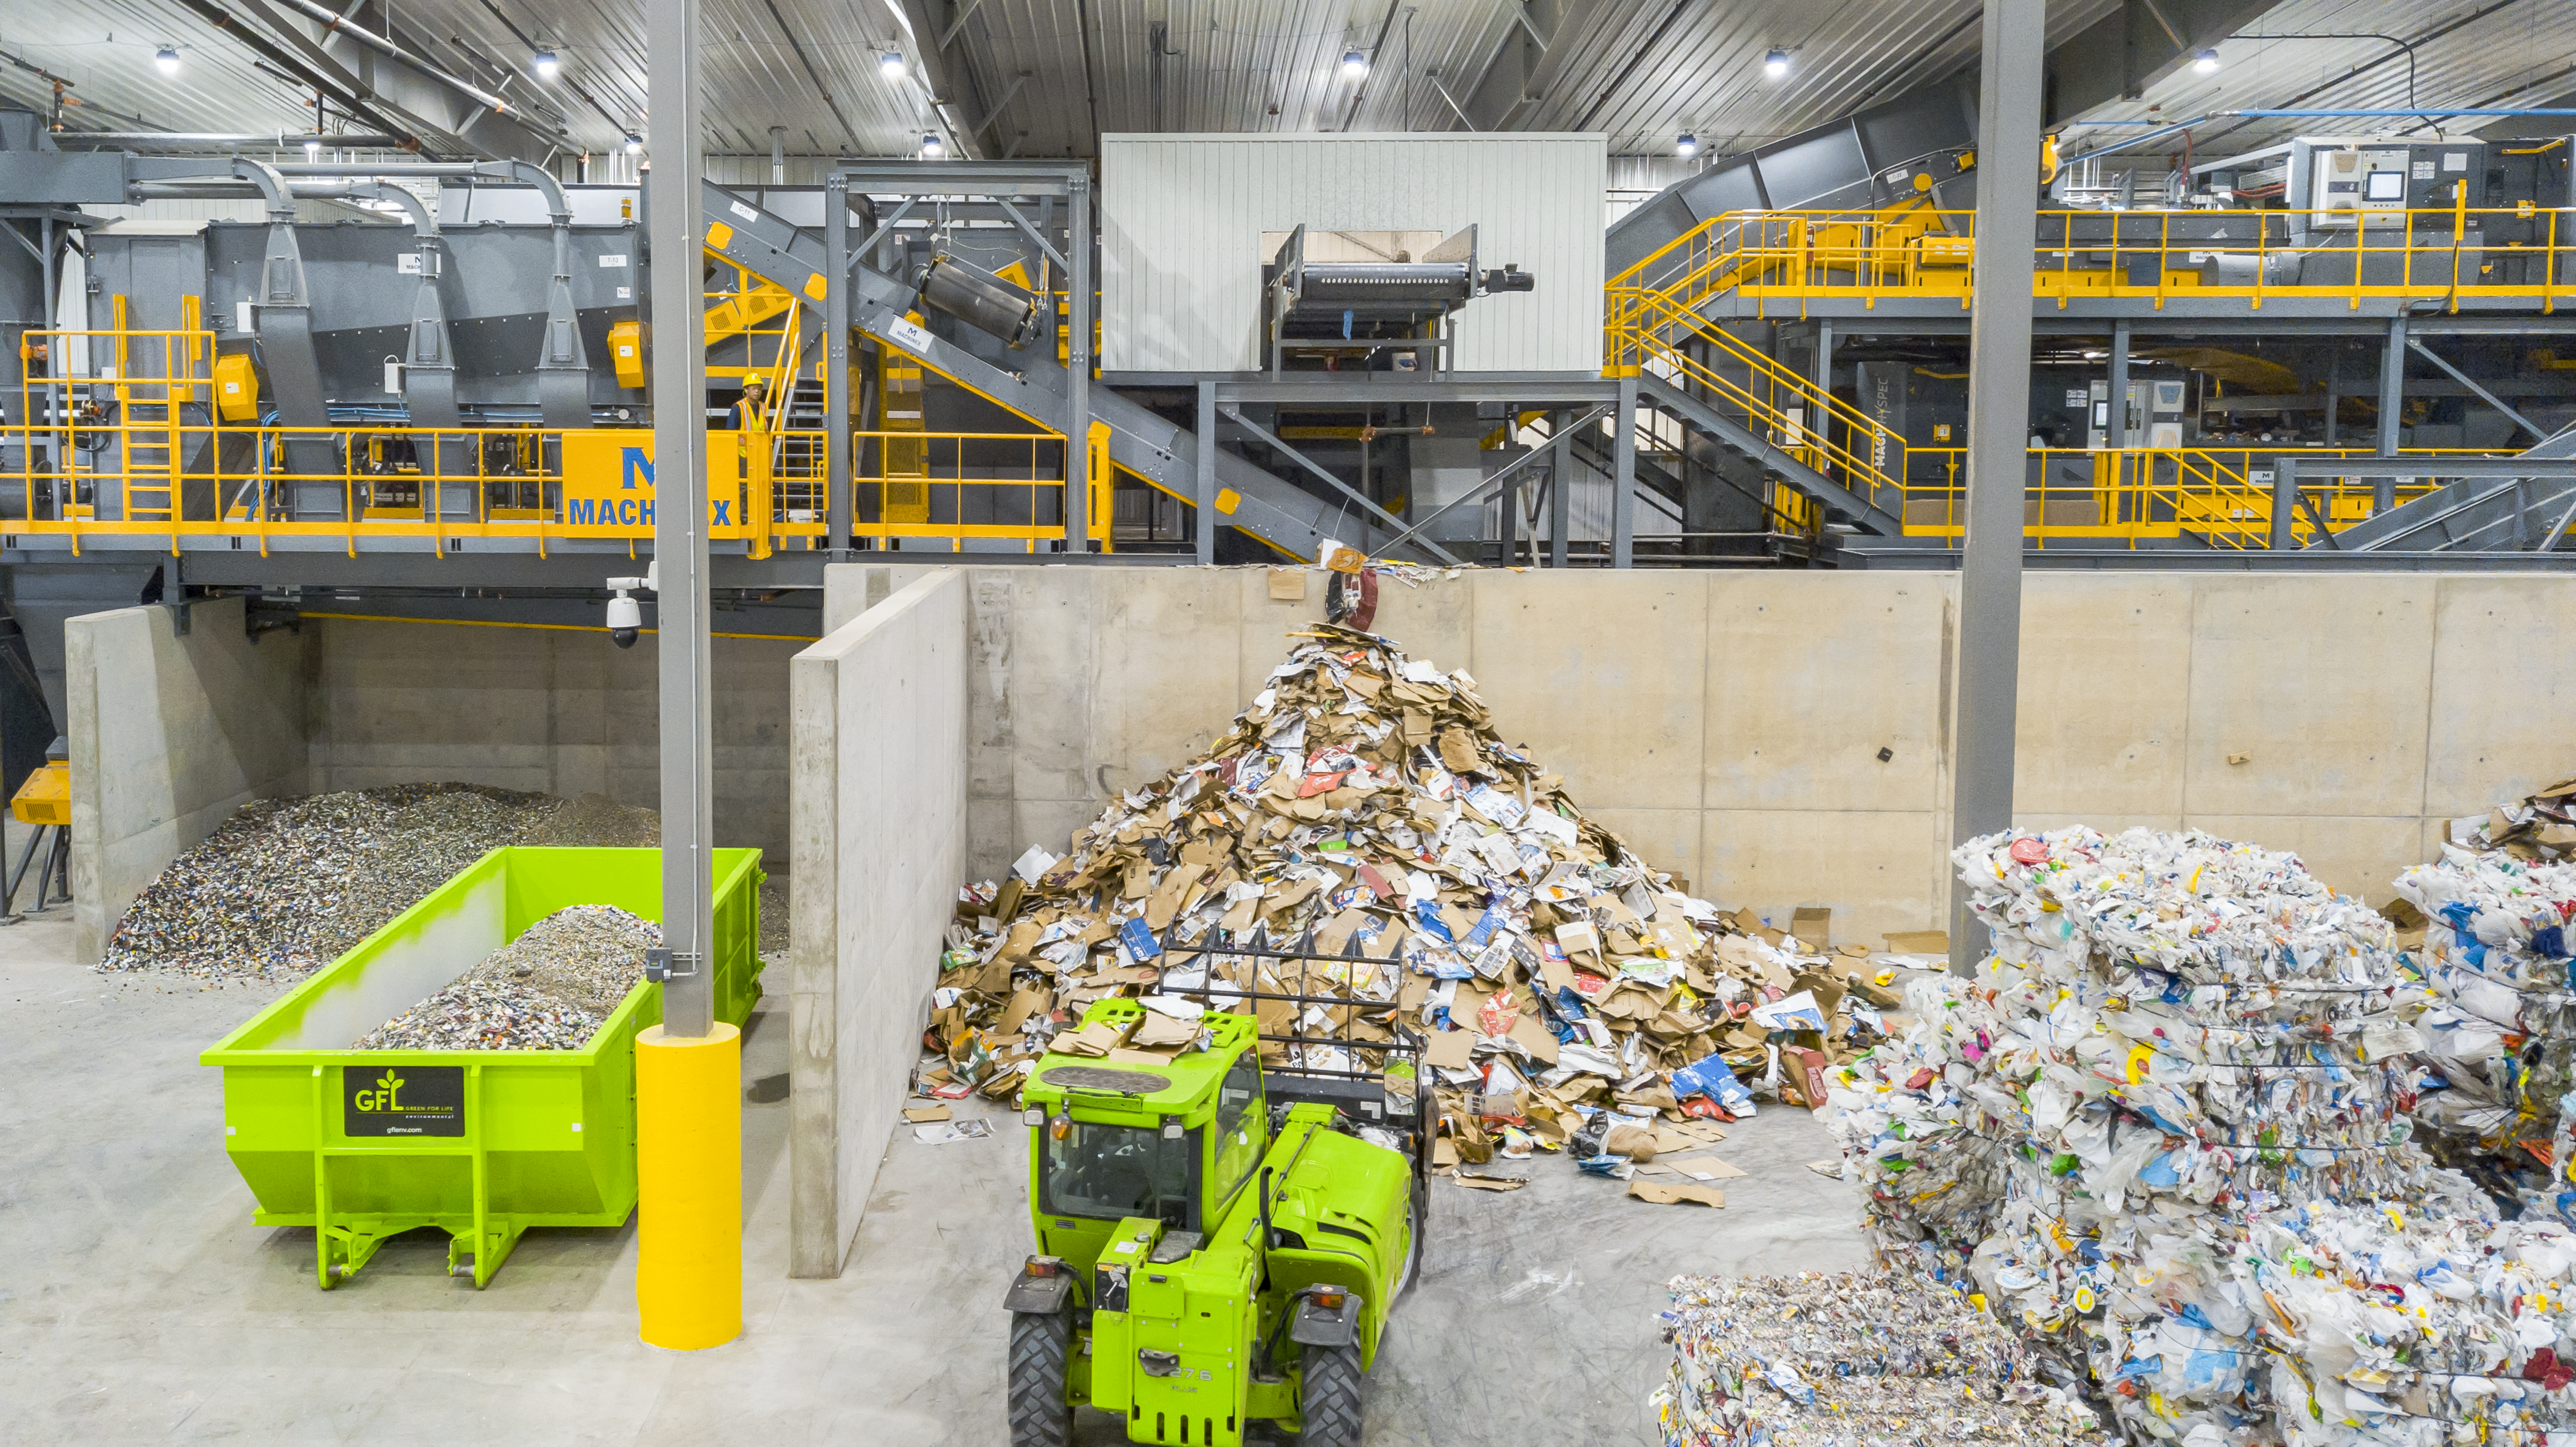 Interior of a recycling location with GFL